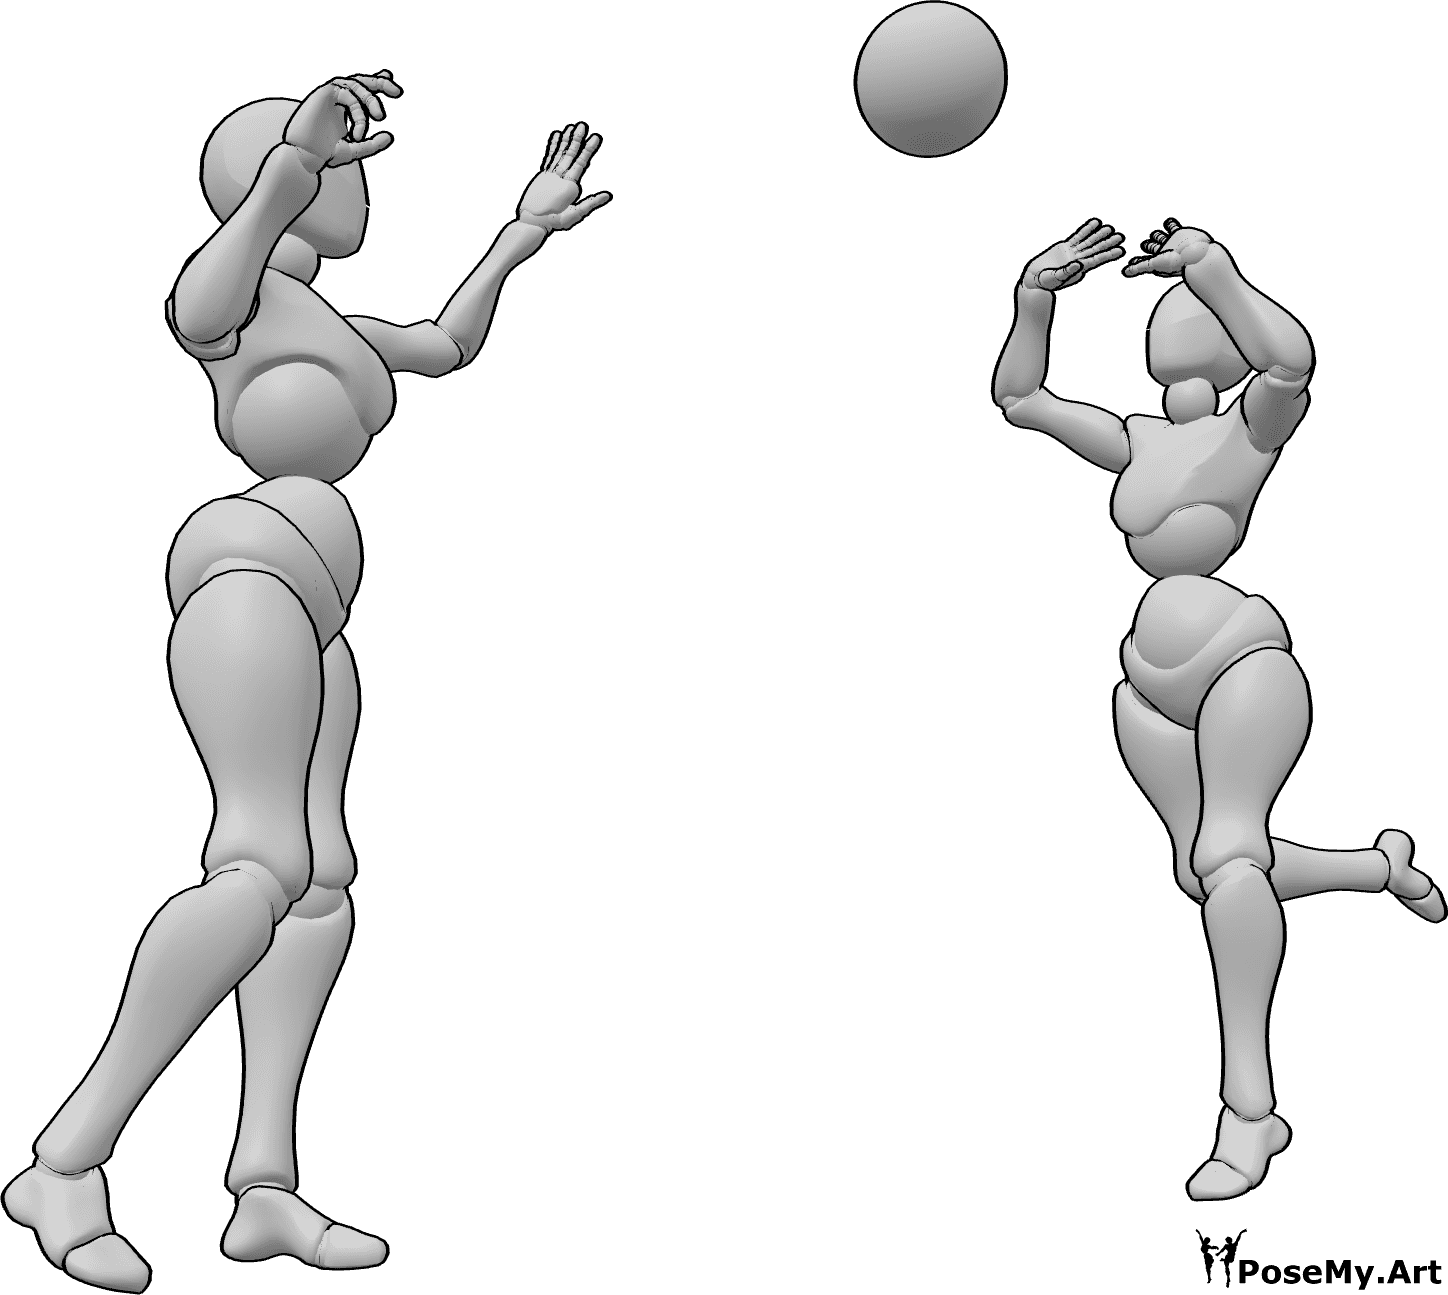 Pose Reference- Females throwing ball pose - Two females are playing with a ball, passing it to each other